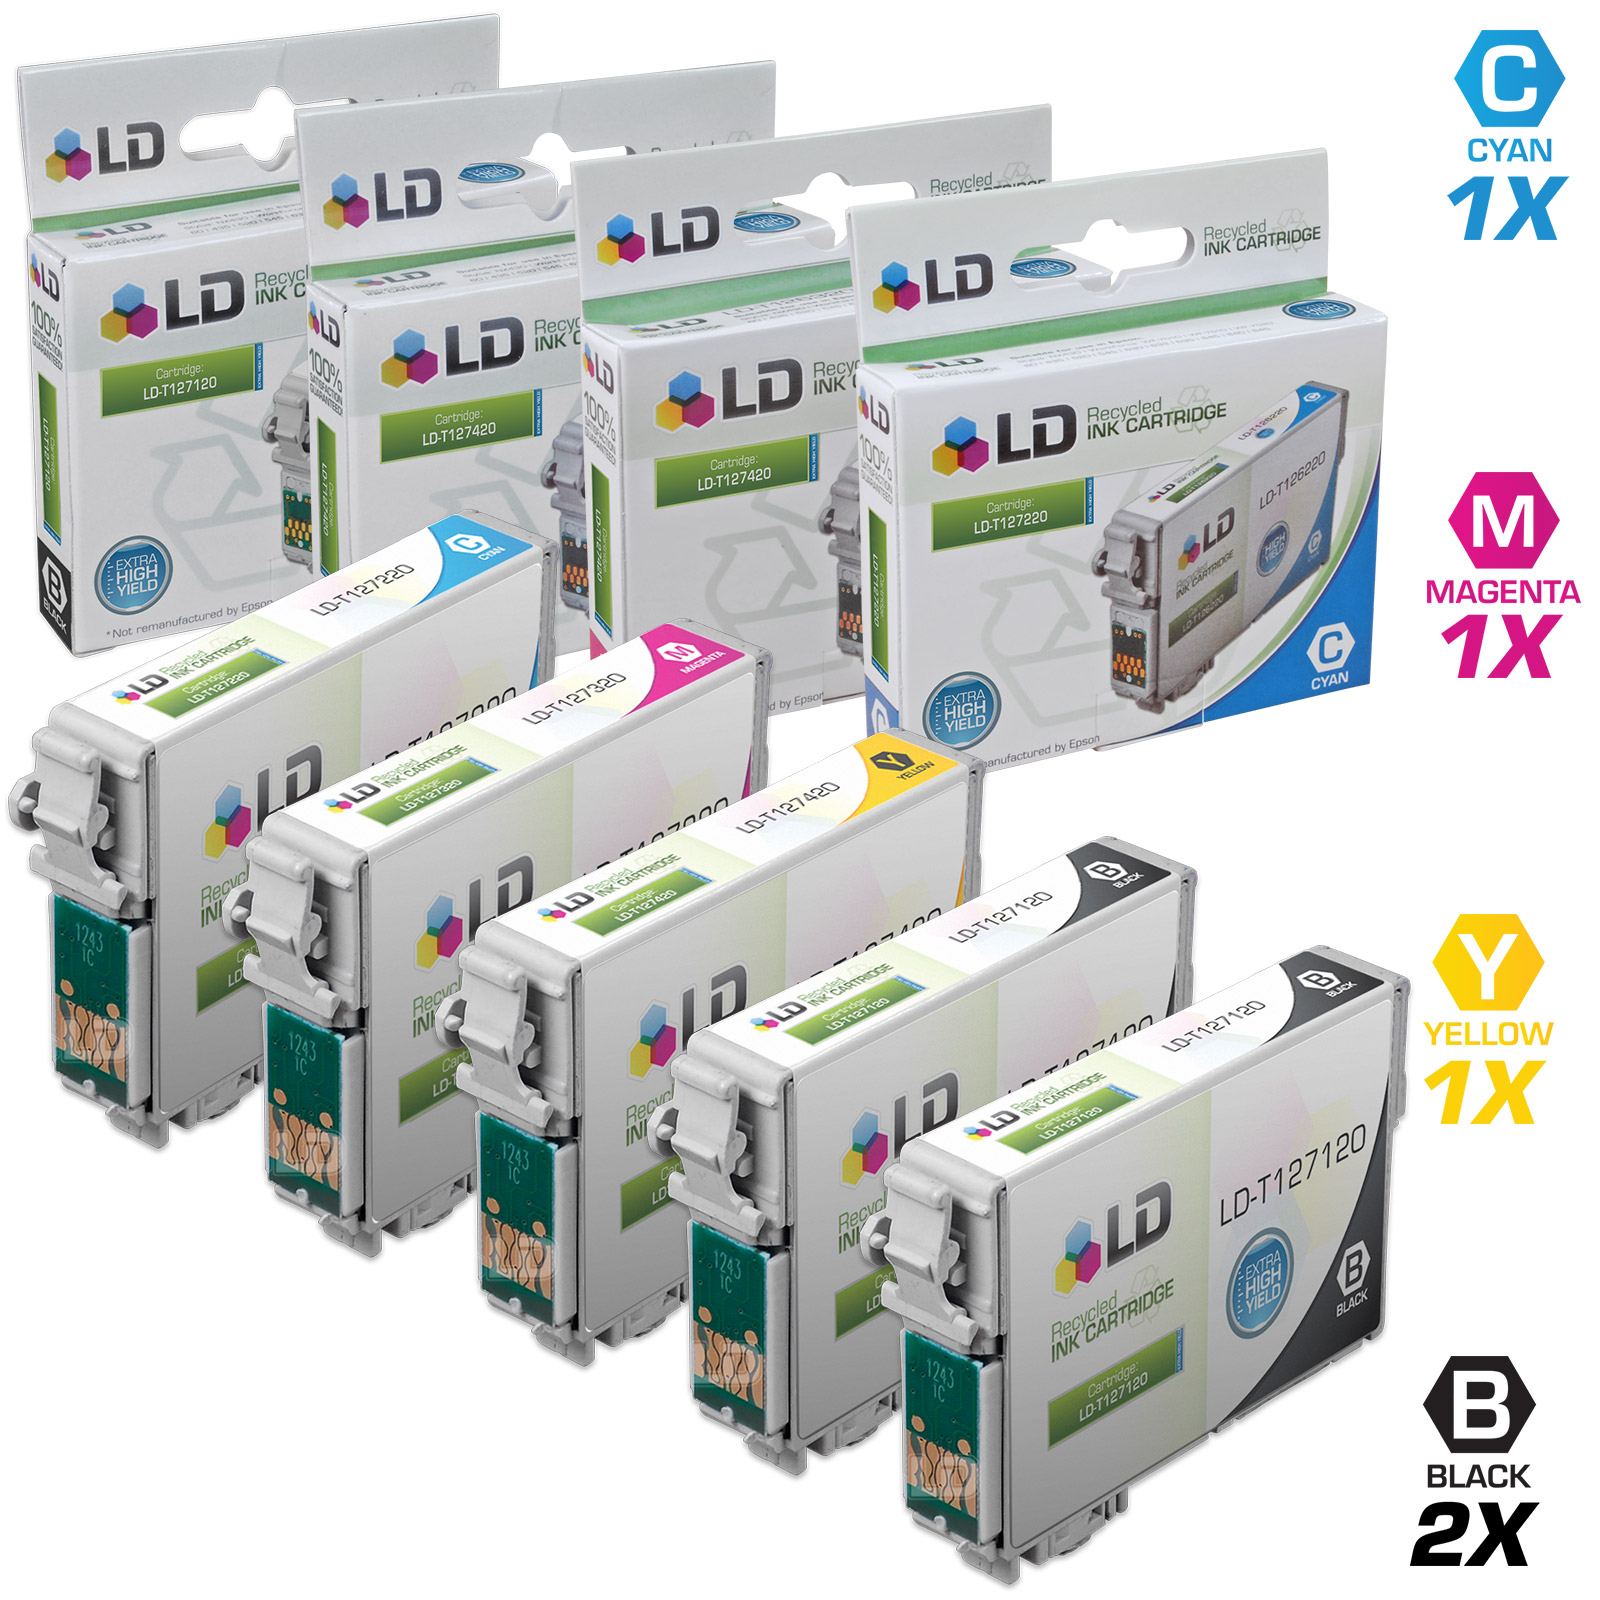 Epson Remanufactured T127 Set of 5 Extra High Capacity Cartridges: Includes 2 Black (T127120), 1 Cyan (T127220), 1 (T127320) Magenta, 1 (T127420) Yellow - image 1 of 5